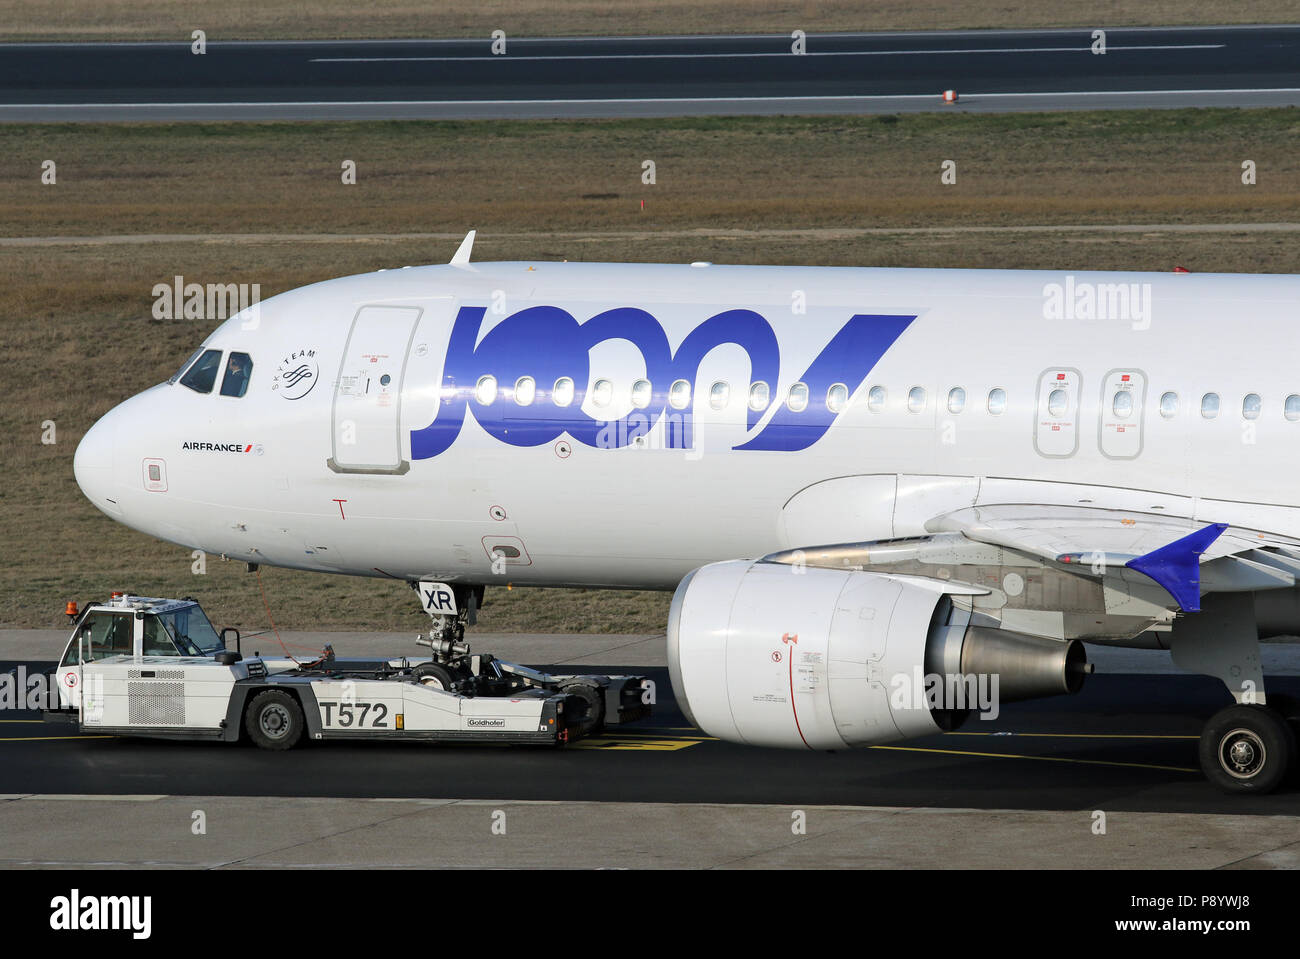 Berlin, Germany, Airbus A320 of the airline Joon is moved by a push-back vehicle Stock Photo